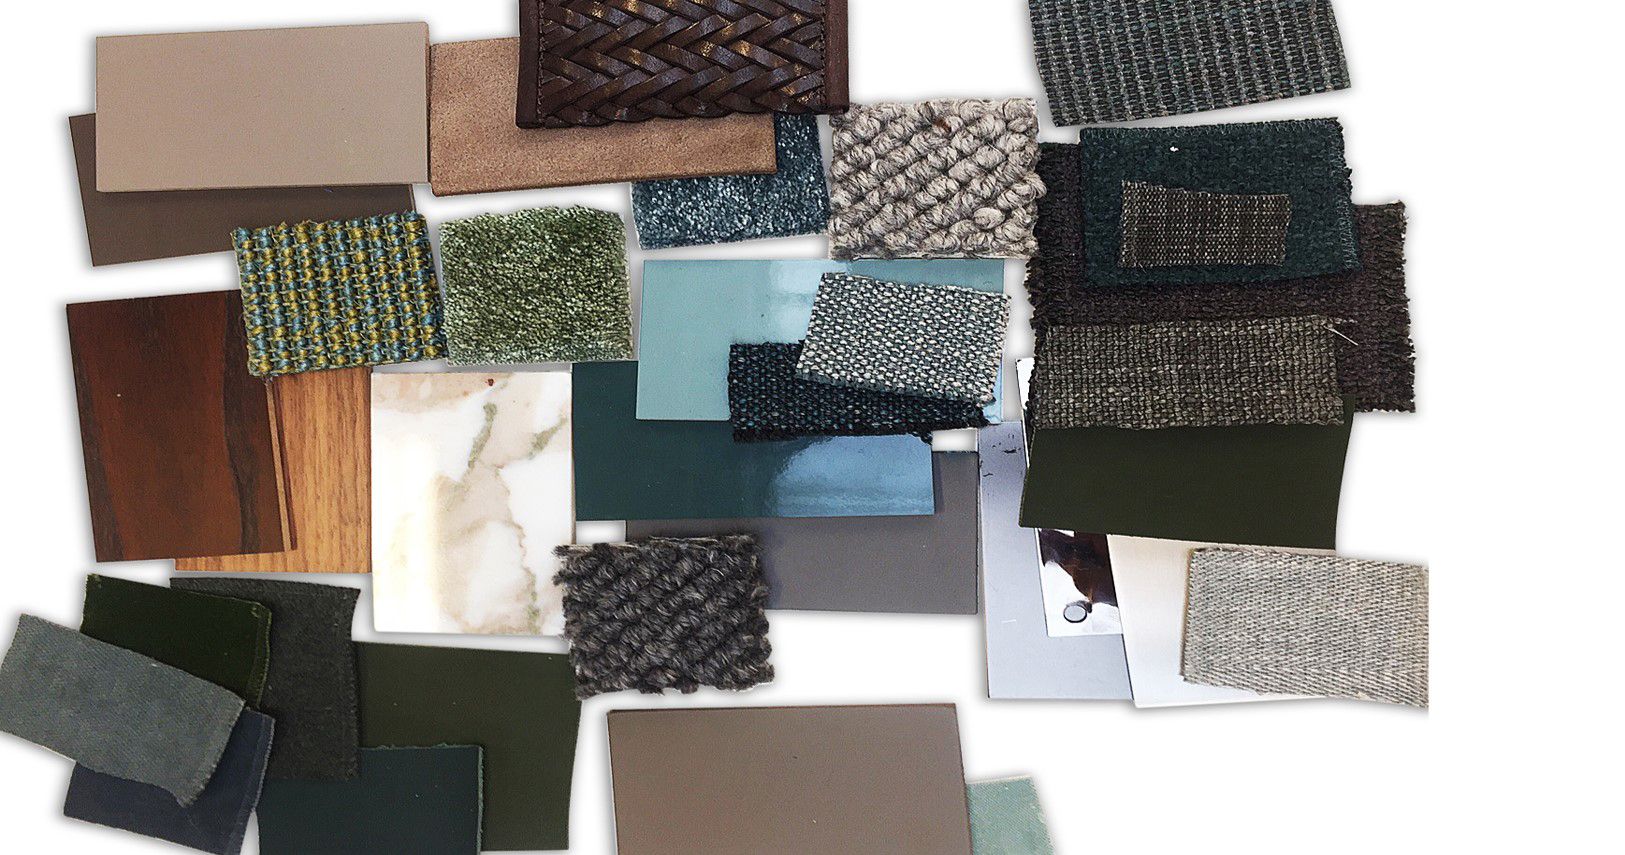 COLOR TRENDS FROM MILAN DESIGN WEEK #2, Kelly Green